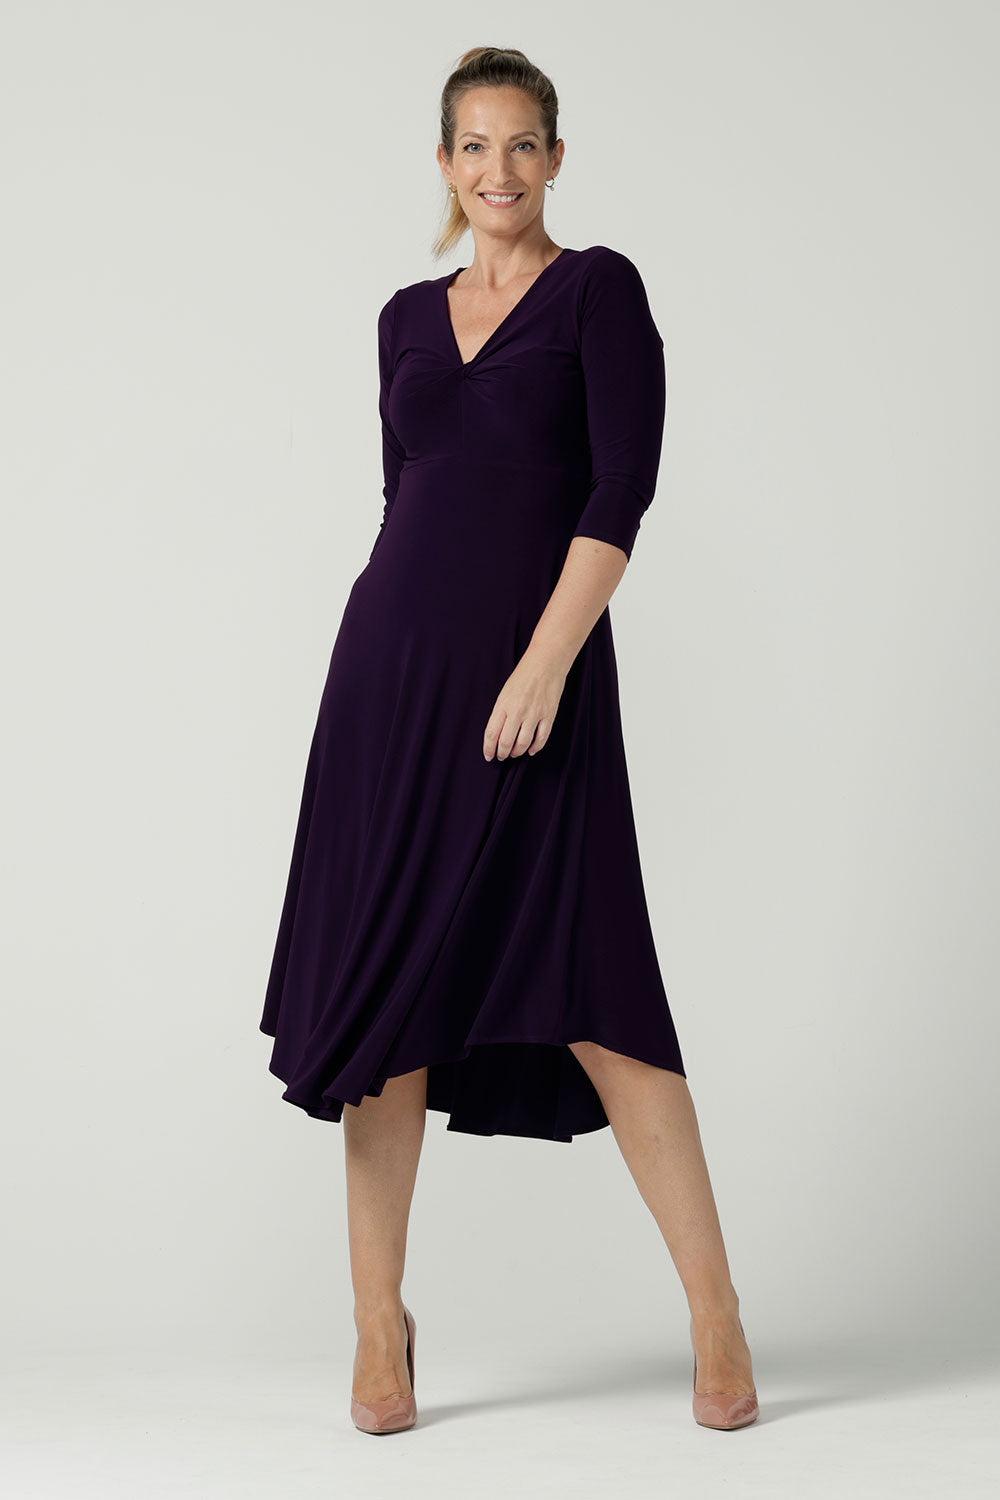 Size 10 Woman wears the Amethyst Kyra dress in jersey. Made in Australia for women. Beautiful twist front neckline with 3/4 sleeve, high-low hem, empire line. Work wear for women and easy care. Great wedding guest outfit, mother of the bride. Made in Australia for women size 8 - 24.